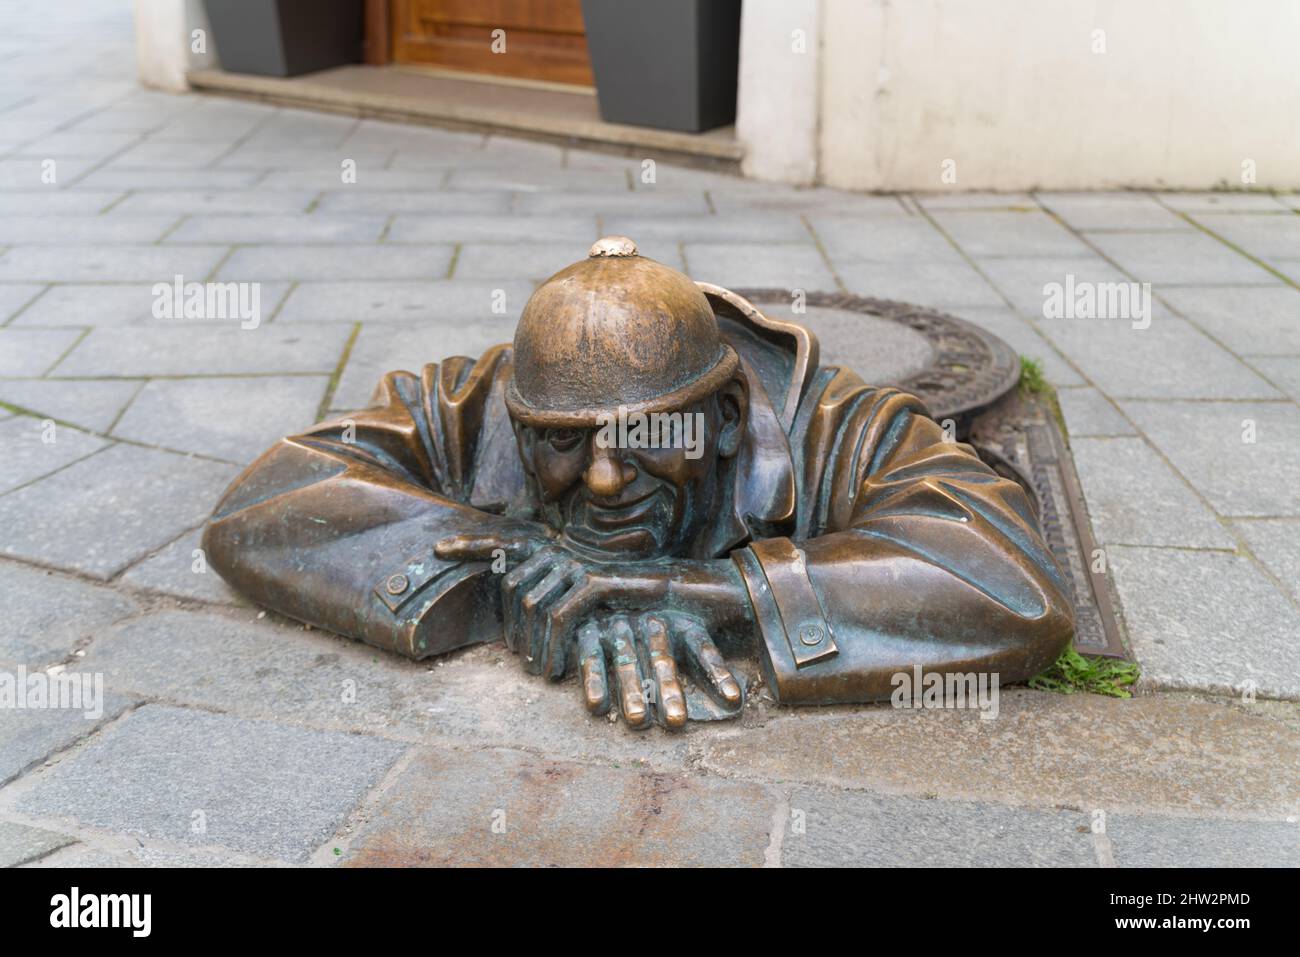 BRATISLAVA, SLOVAKIA - JULY 27, 2020: The bronze statue, with a grin on his face, peeks his head from underneath a manhole cover in the Old Town and h Stock Photo